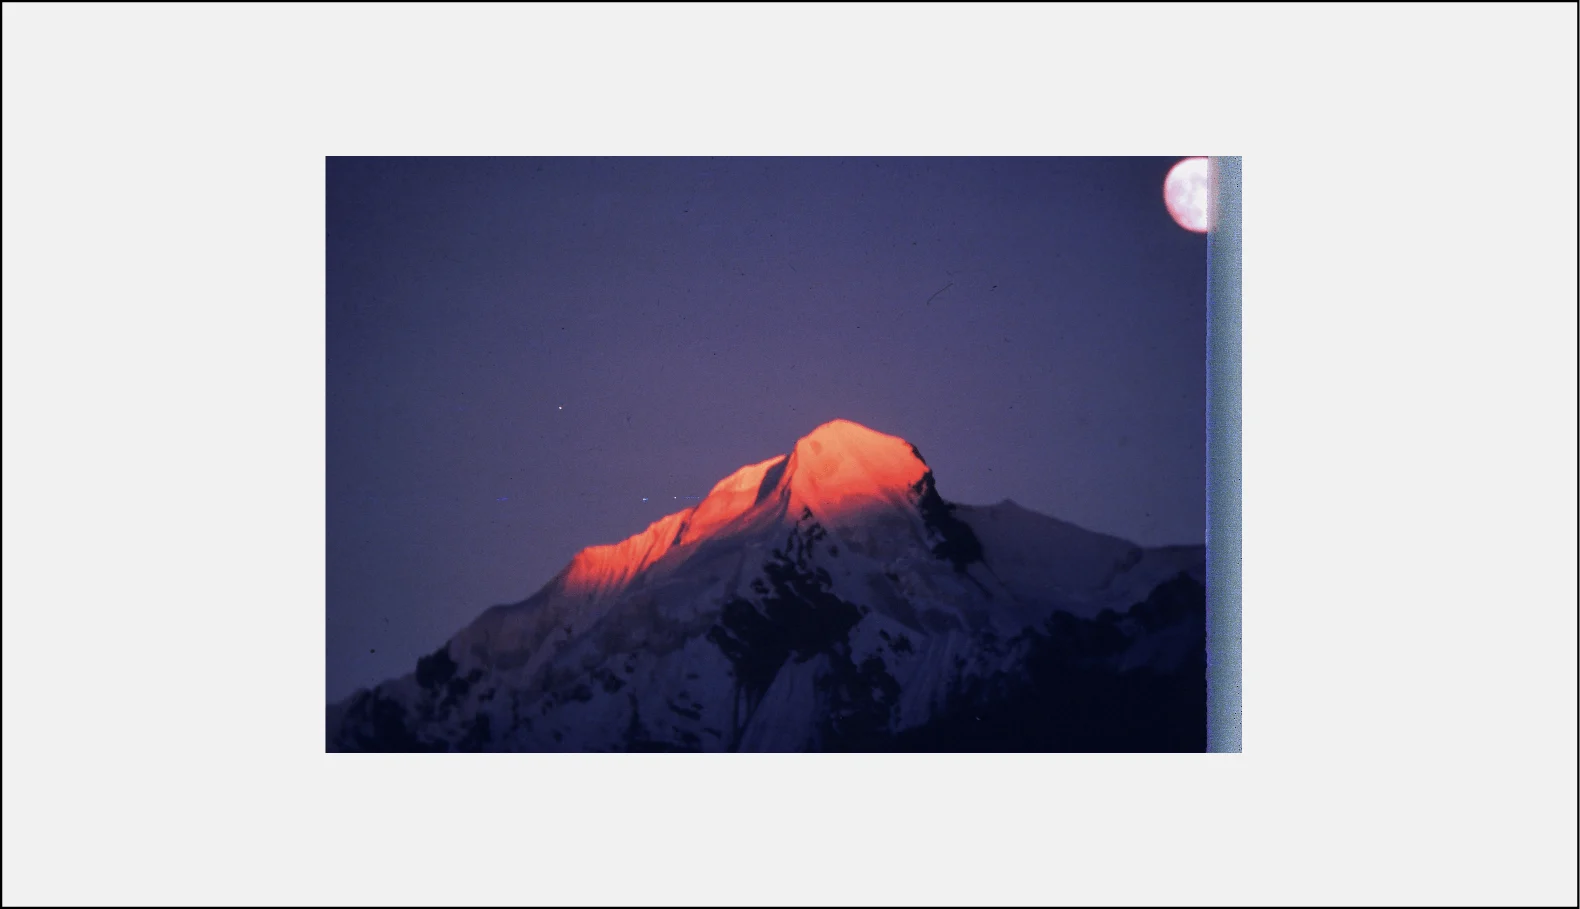 Nanda Devi sanctuary - moonrise over Deo Damla peak in the outer ring of peaks during the British Kalanka expedition. Photo courtesy Mandip SinghSoin/Ibex Expeditions collection (Sept 1978)